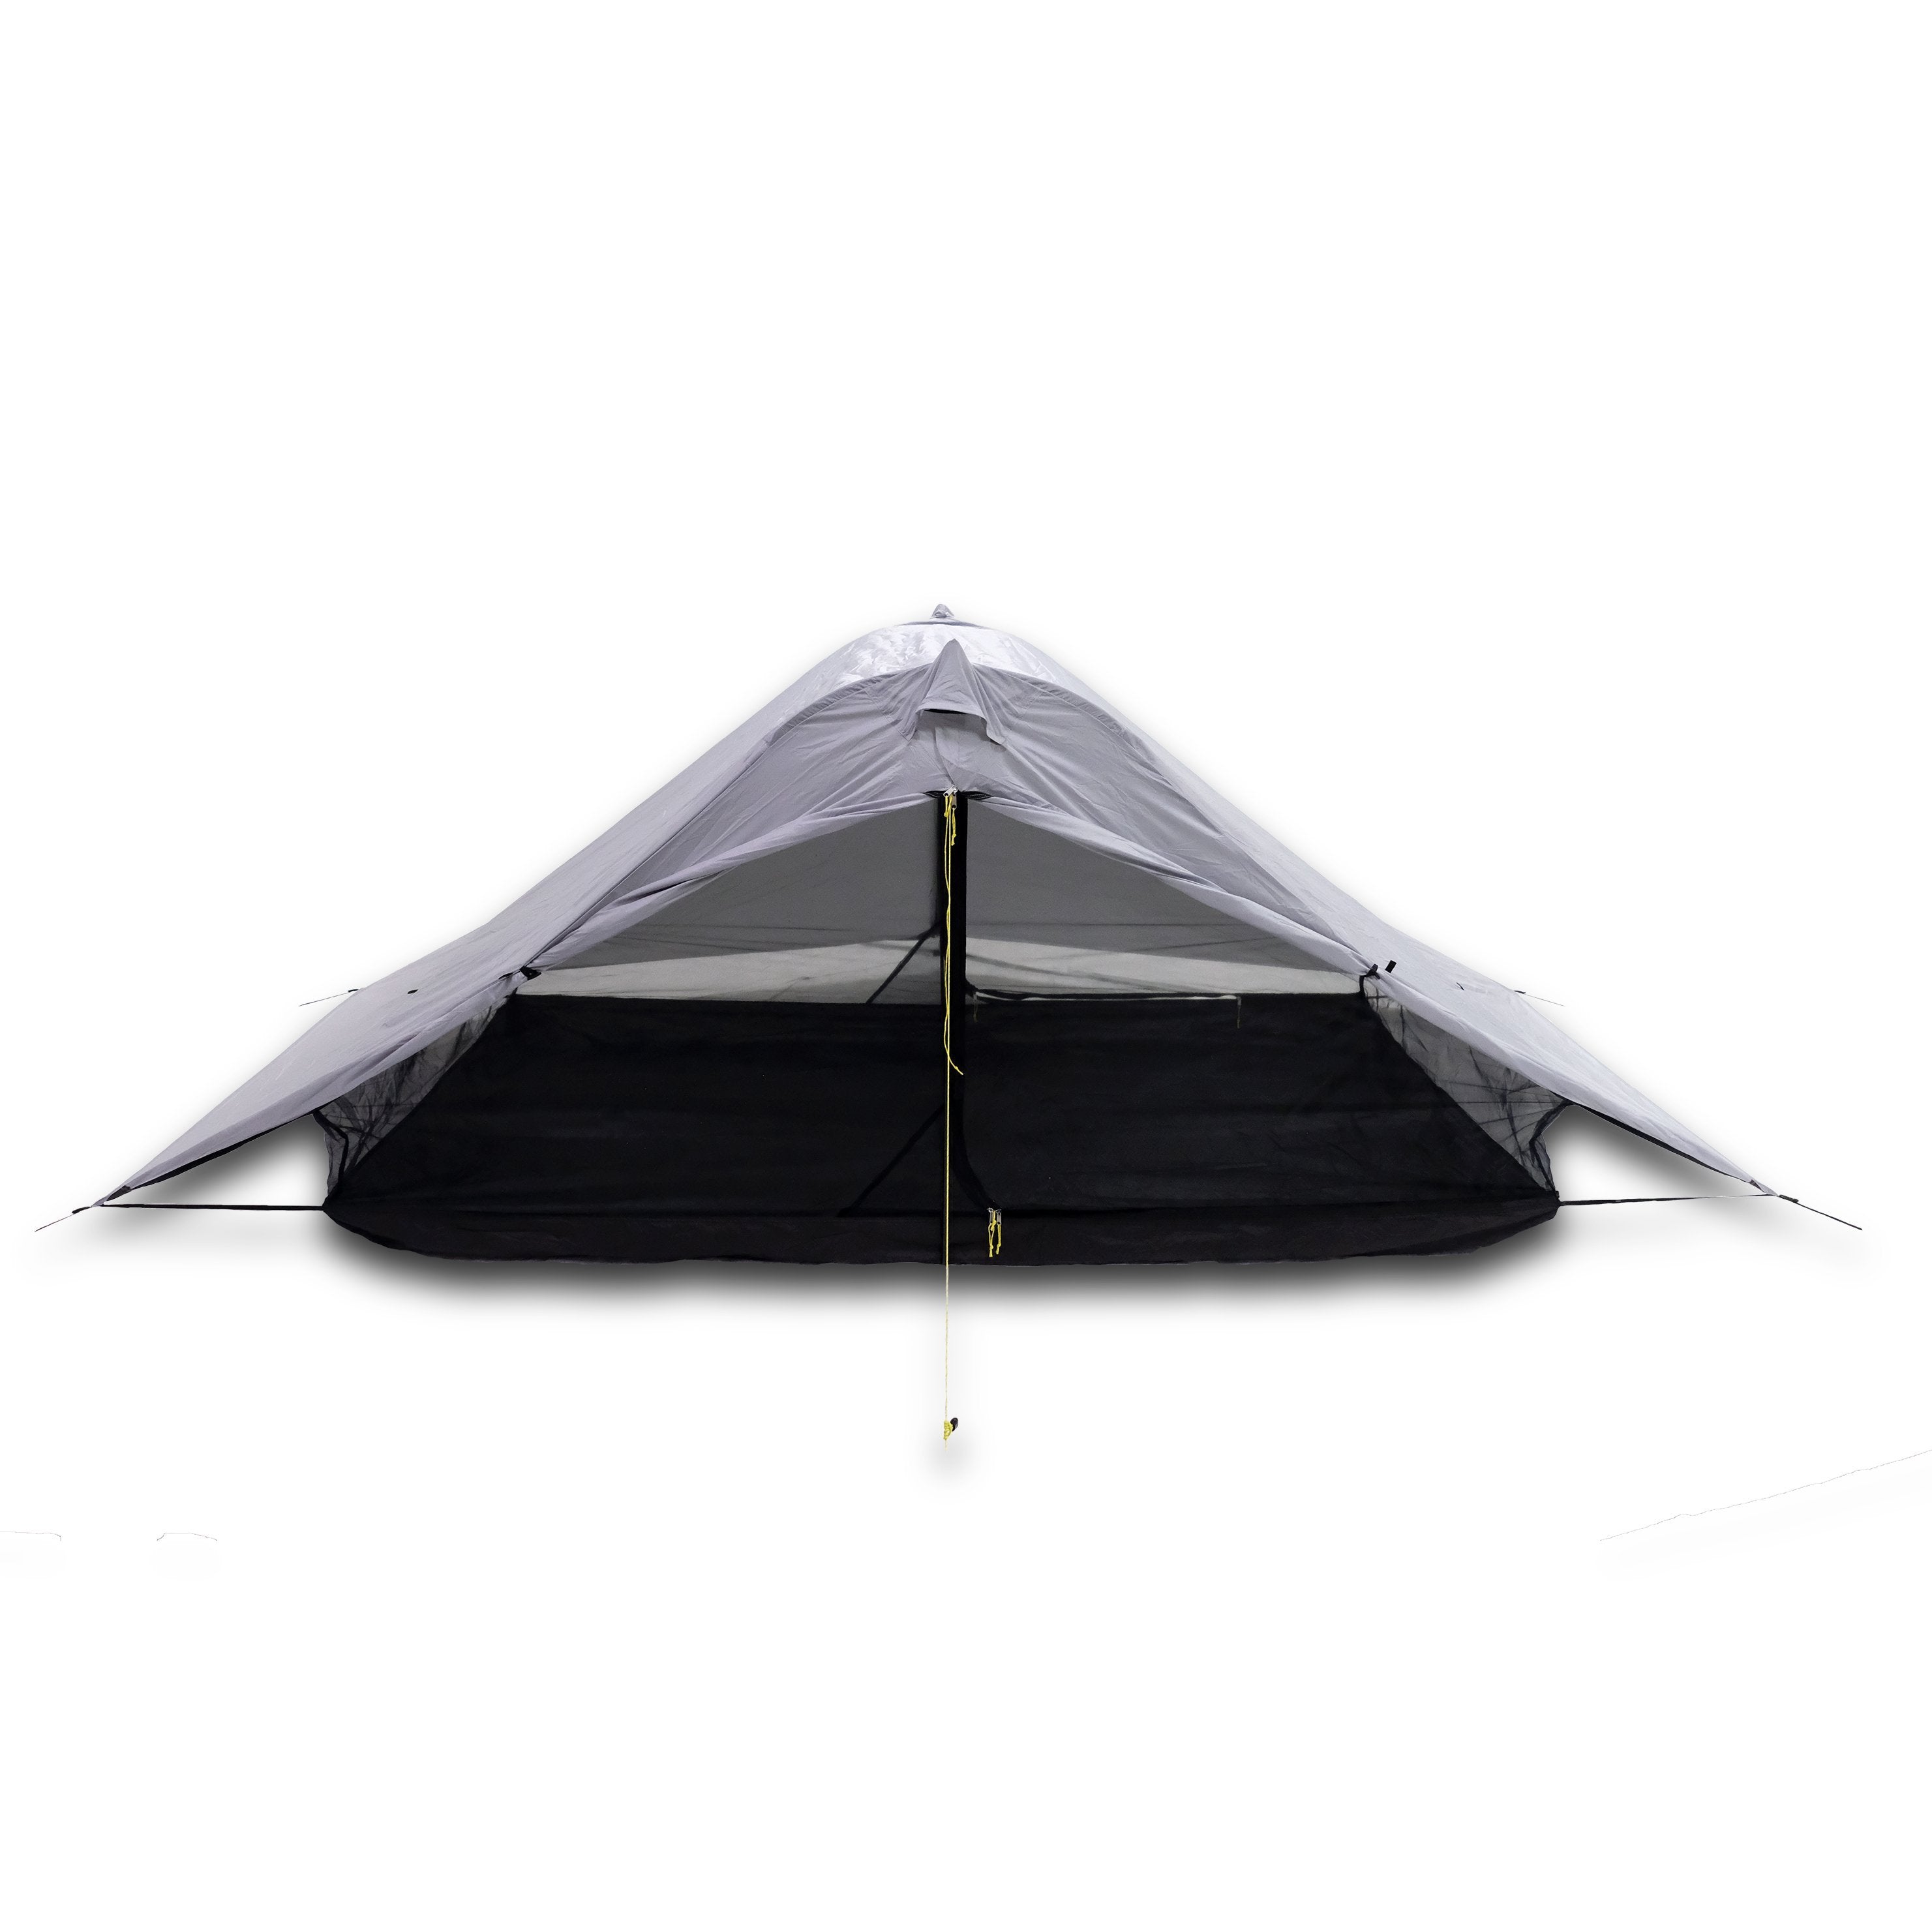 Lunar Duo Outfitter Hiking Tent